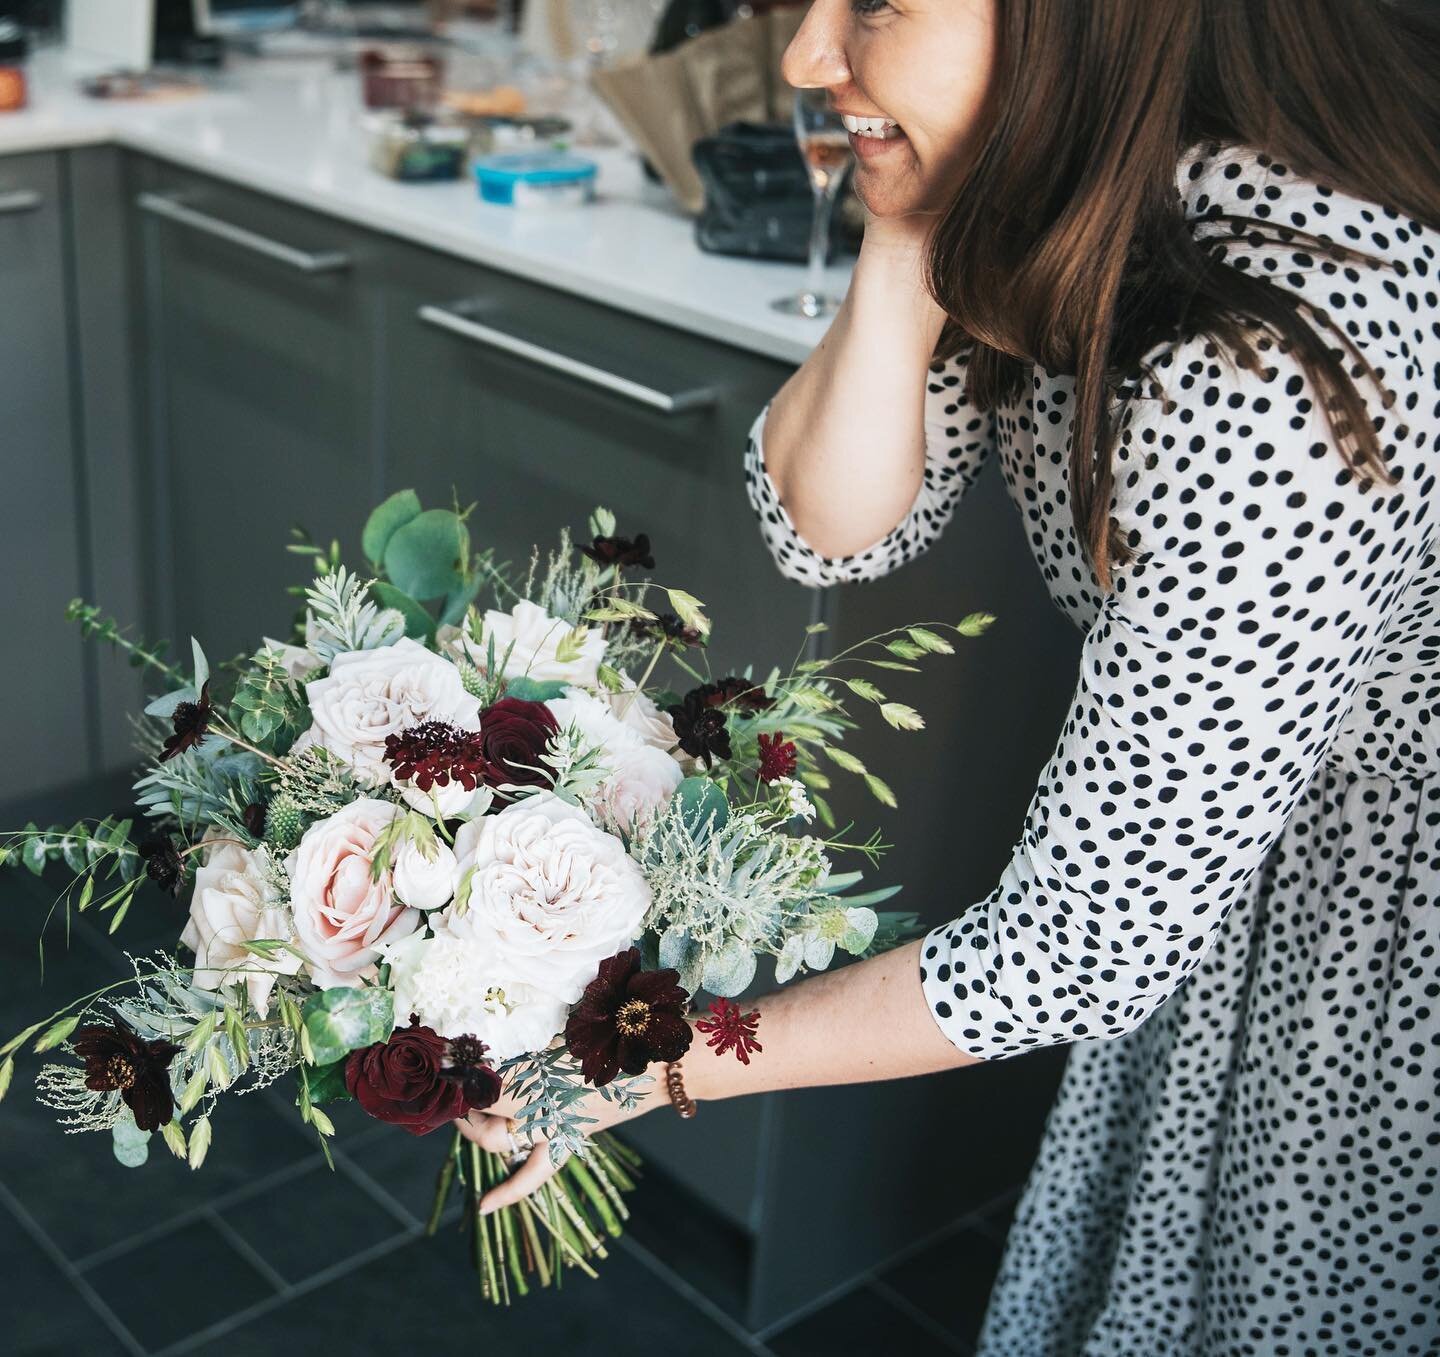 Happy International Woman&rsquo;s day! 🤍

Rare photo of myself. Hi I am Aline 👋🏽. This moment was captured by @jenowensimages when I was handing over a great friend Kay&rsquo;s wedding bouquet. This is such a special moment for a florist, (normall